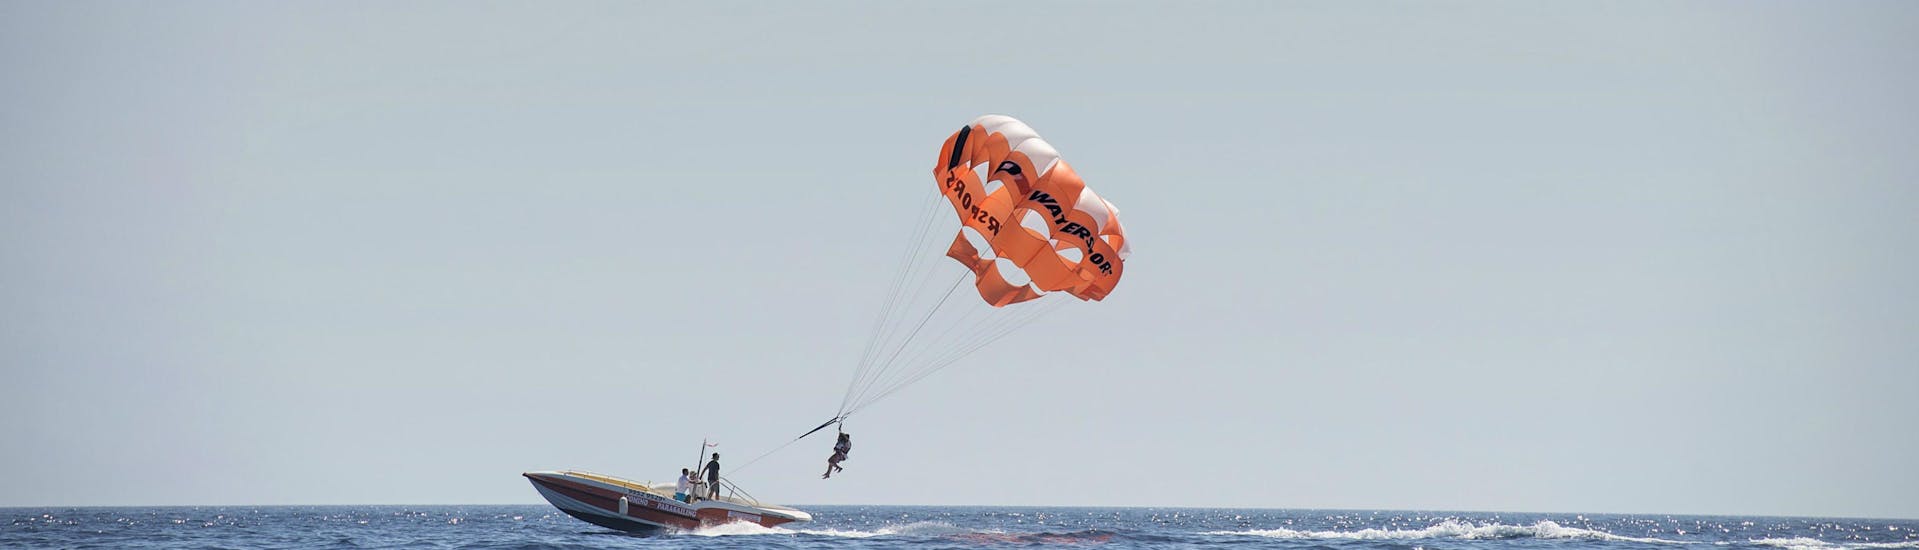 parasailing-over-the-island-of-comino-palm-beach-watersports-hero